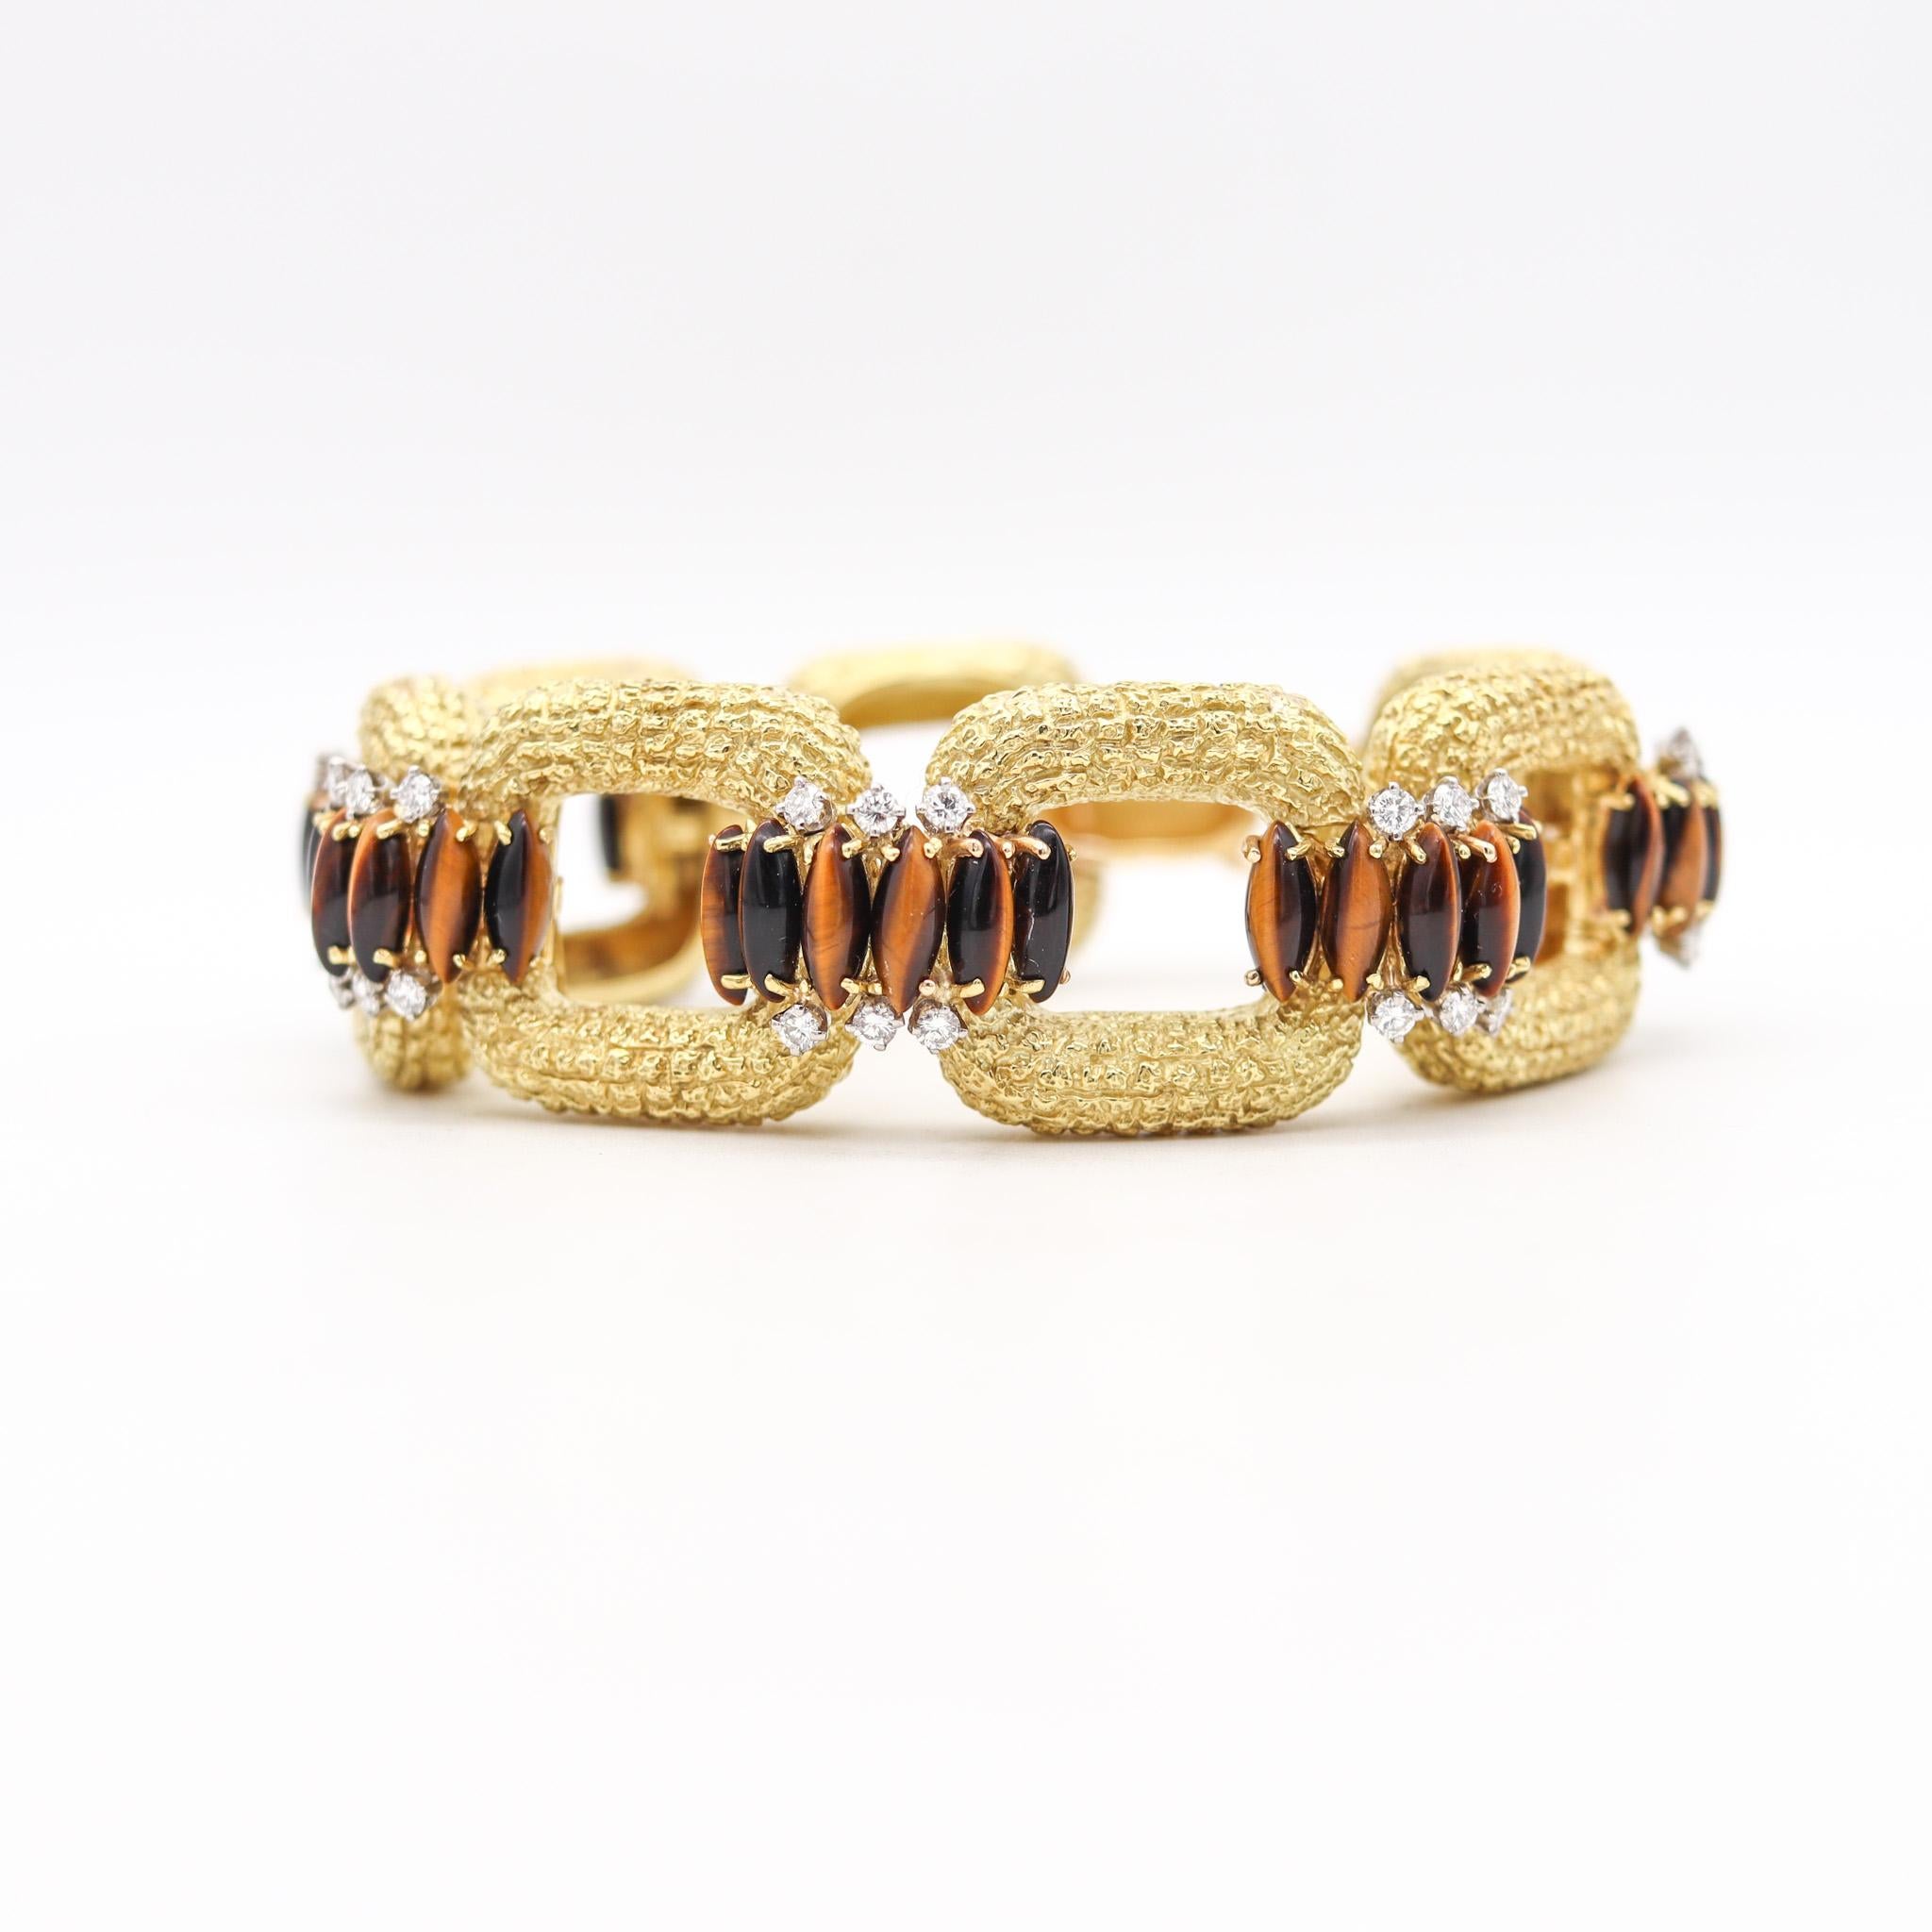 An statement bracelet designed by La Triomphe.

Fantastic retro modernist bracelet, created in Astoria New York by La Triomphe, back in the early 1970. This stunning piece was carefully crafted in solid rich yellow gold of 18 karats with textured